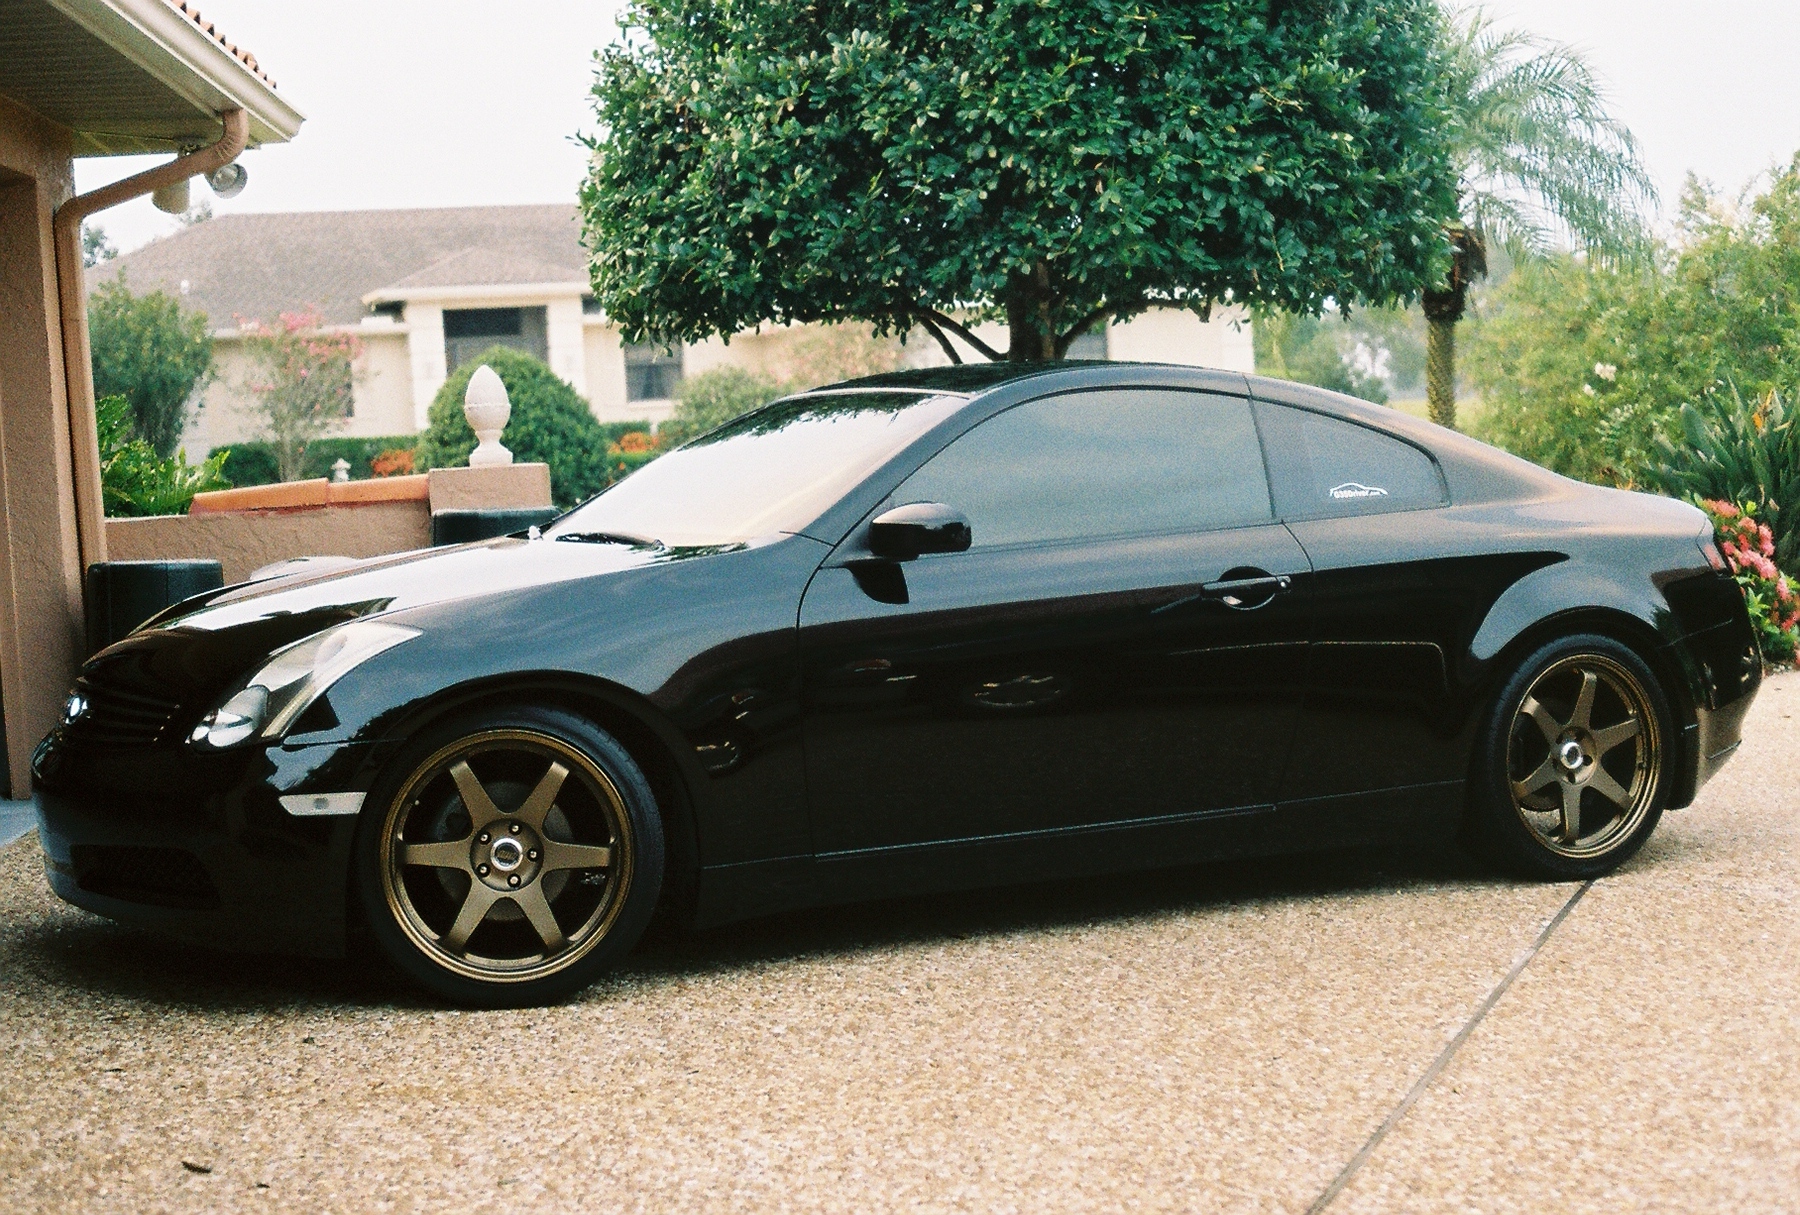 You can vote for this Infiniti G35 Coupe to be 